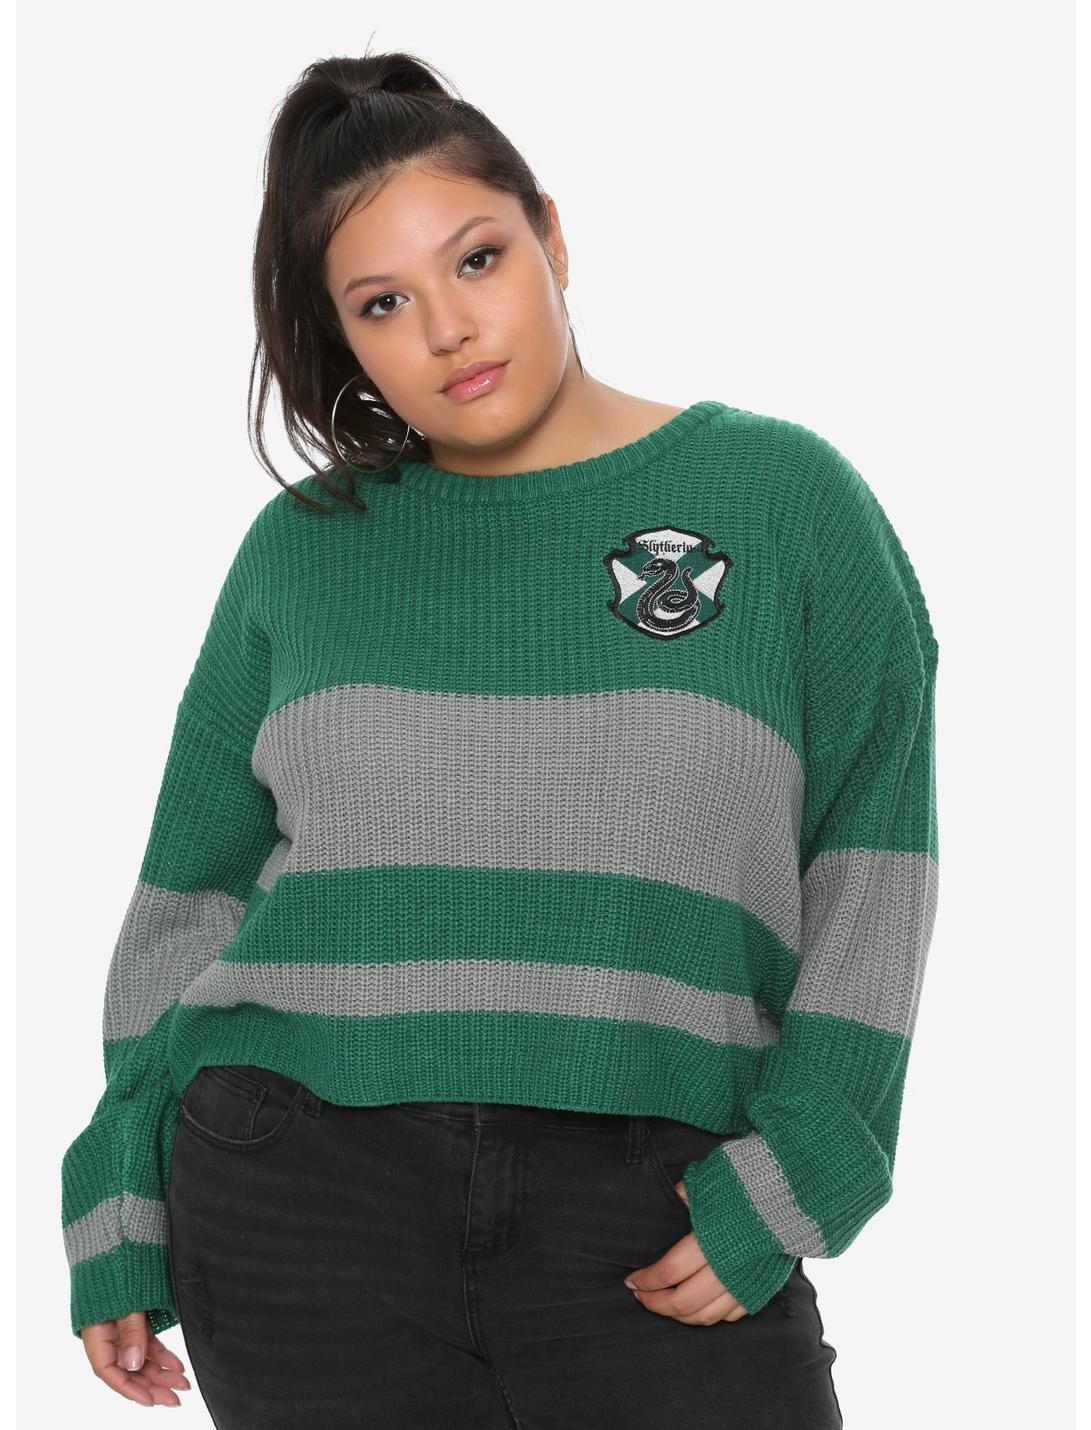 Harry Potter Slytherin Girls Quidditch Sweater Plus Size, GREEN, hi-res